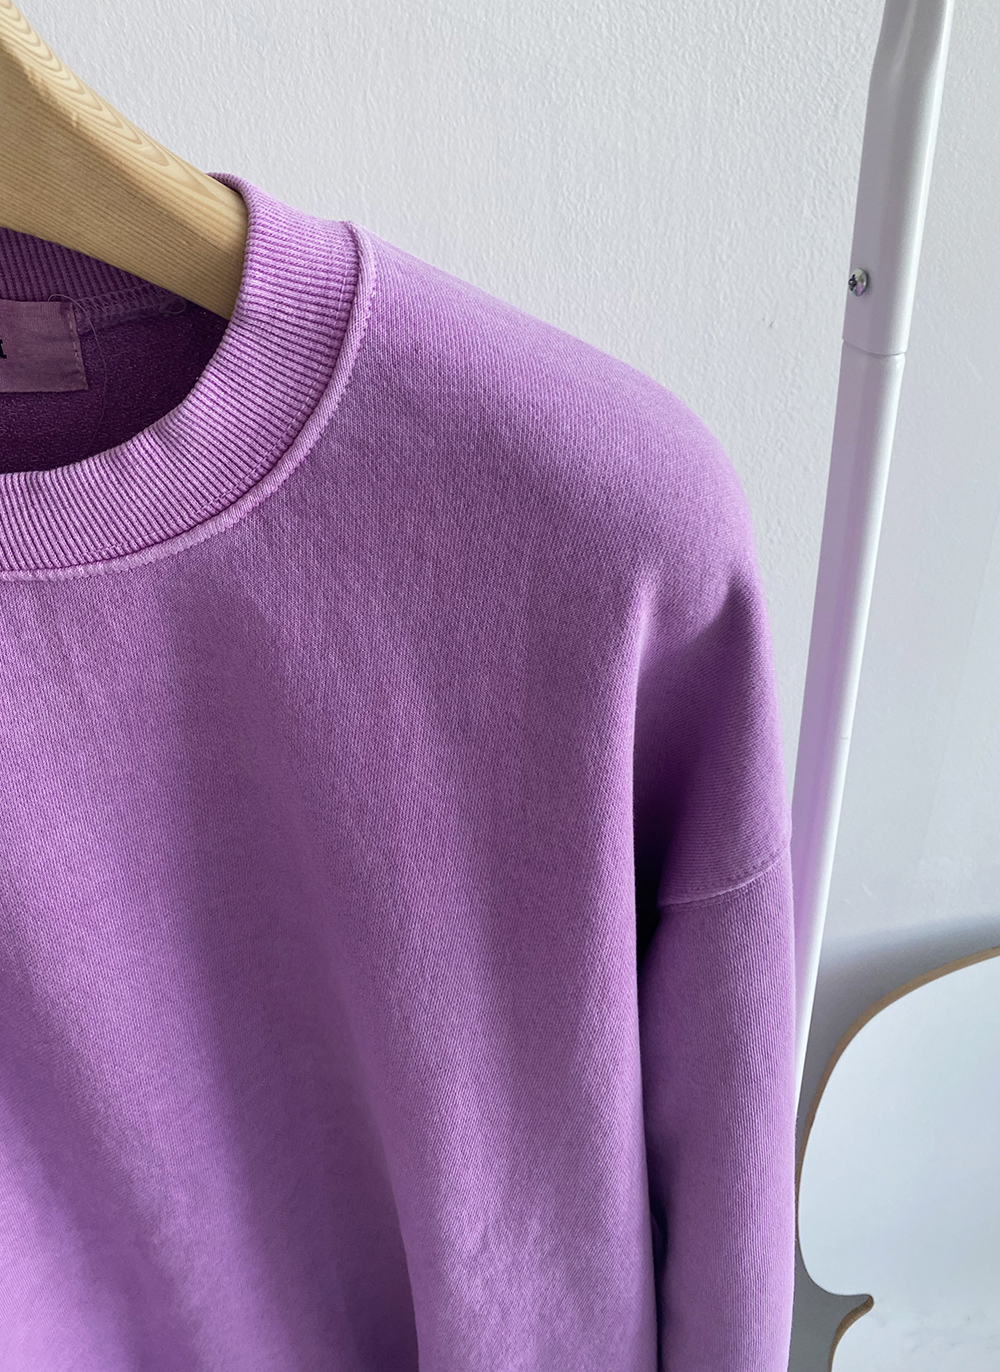 long sleeved tee detail image-S1L71